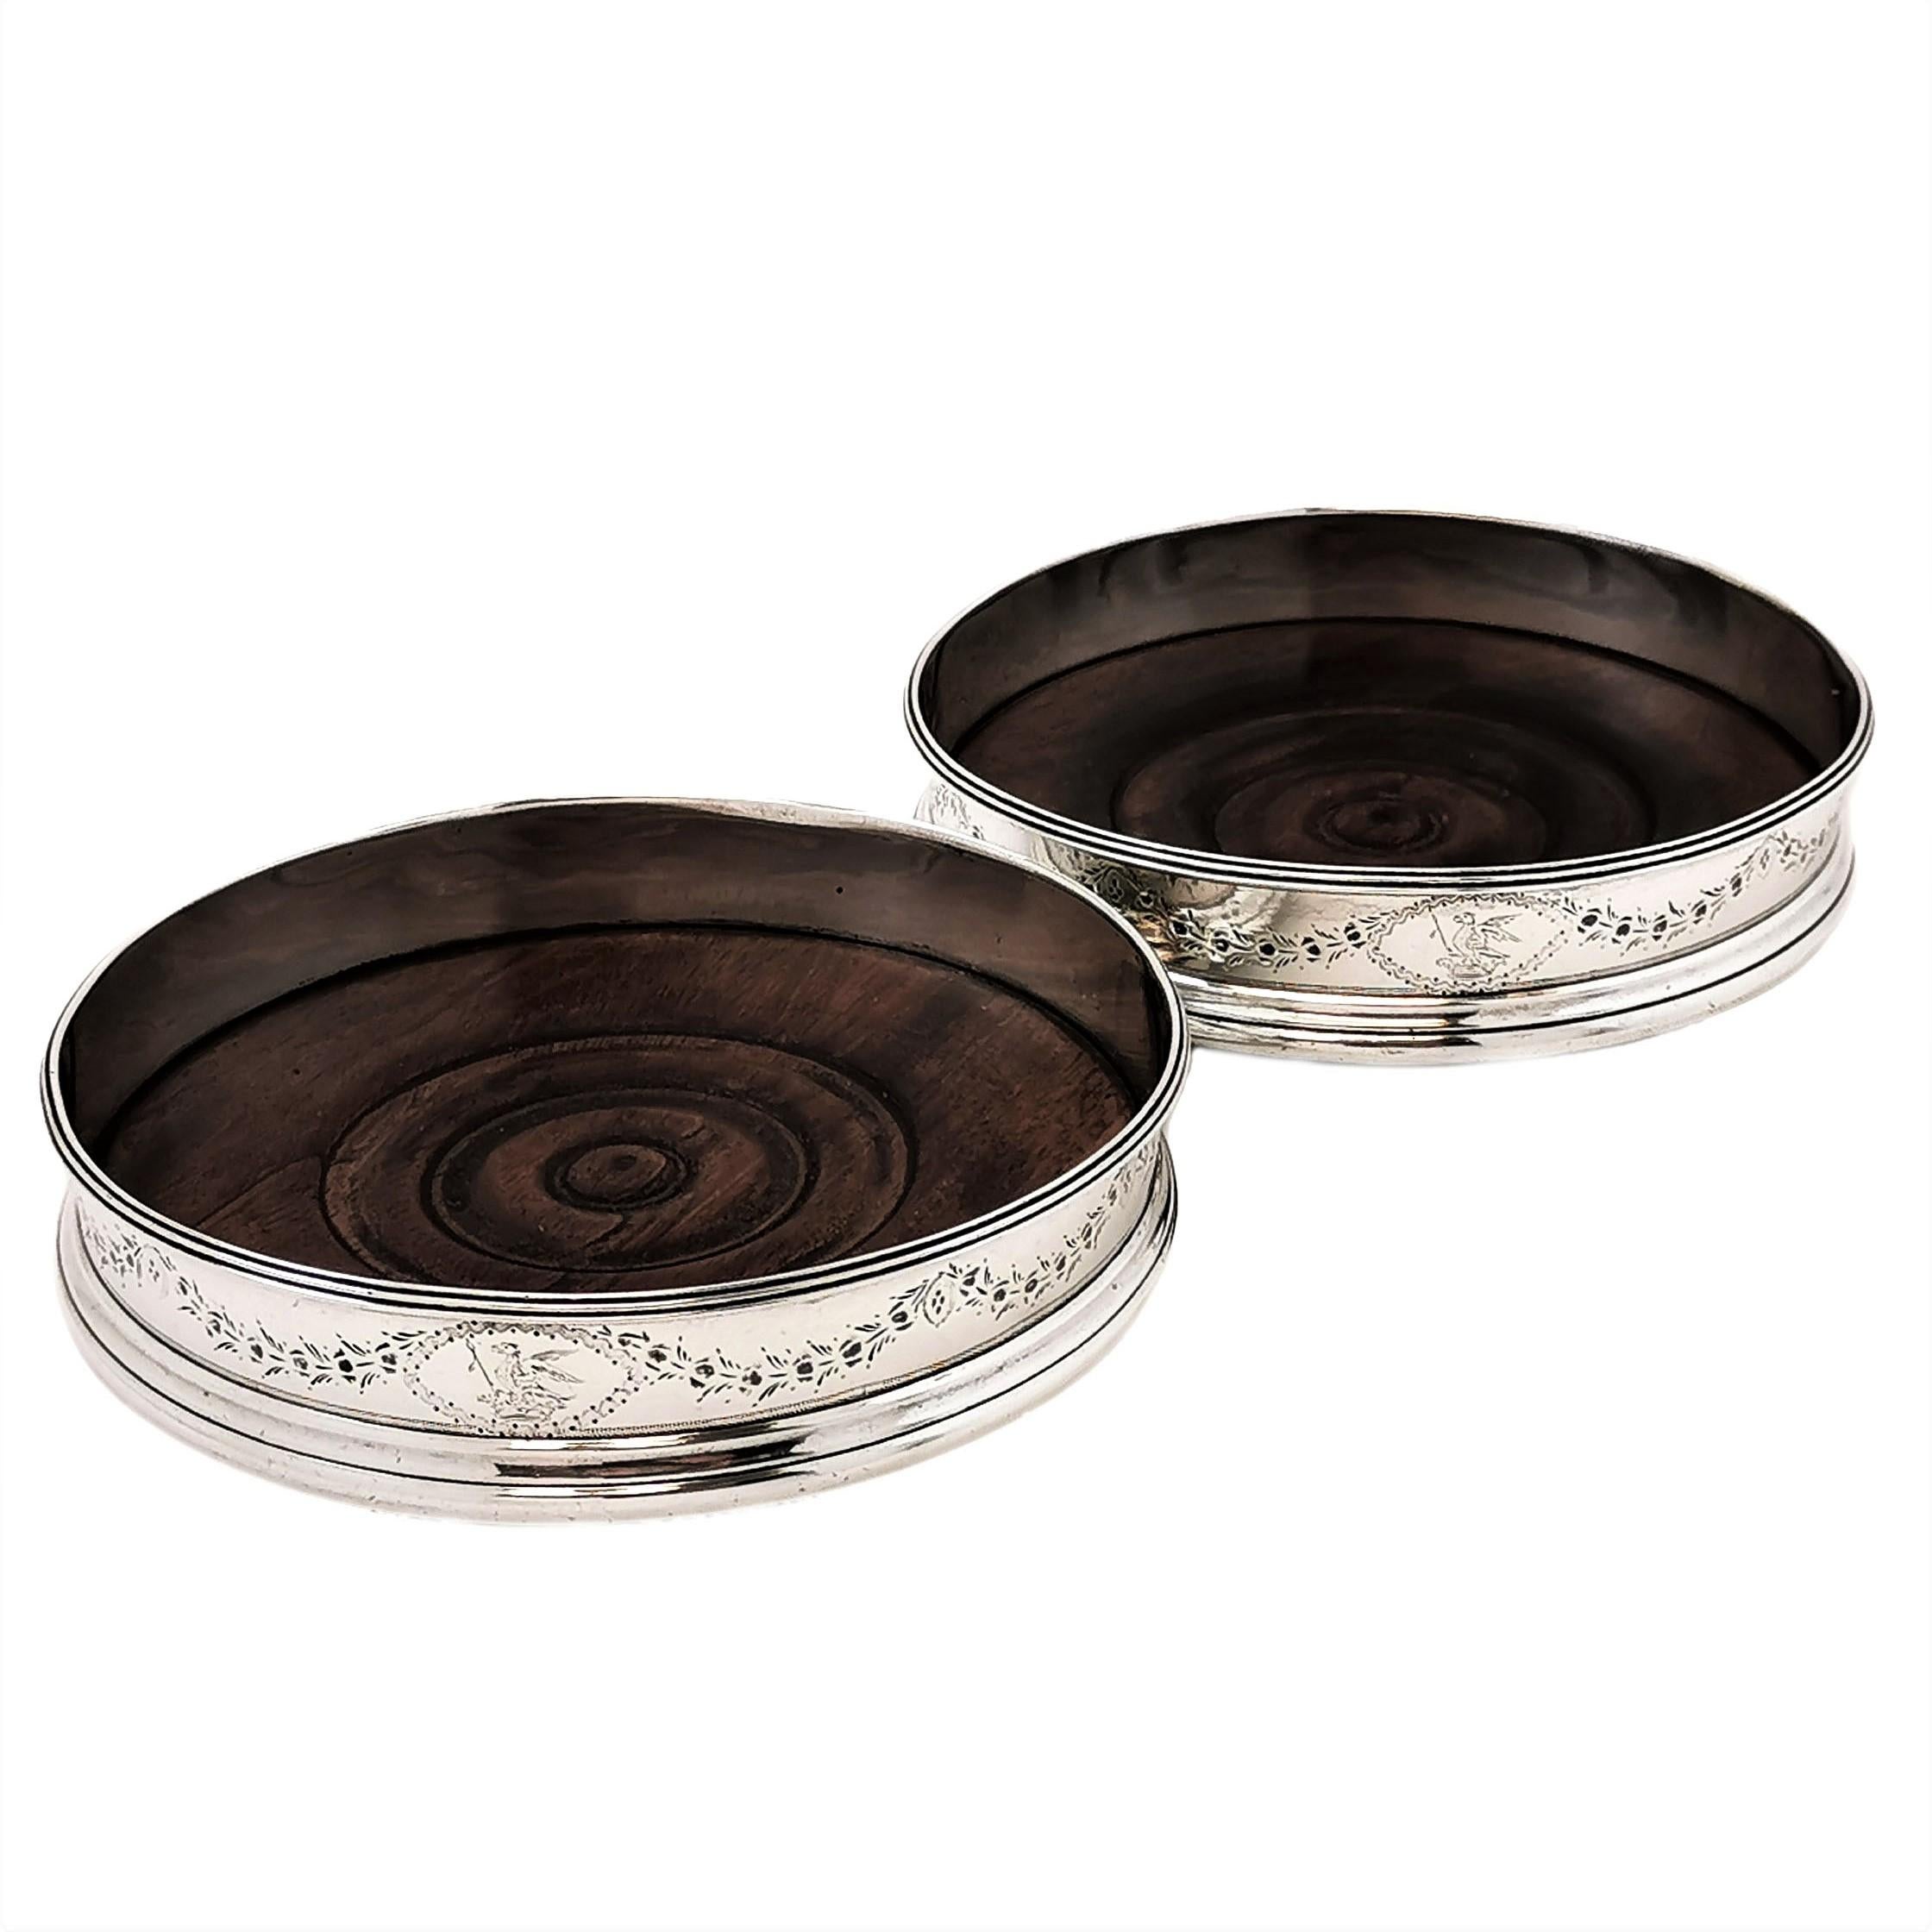 A pair of lovely Antique George III sterling Silver Wine Coasters with wooden bases. The Solid Silver sides of the Coasters each have delicate engraved floral band with a small cartouche surrounding an engraved crest.

Made in London in 1786 by